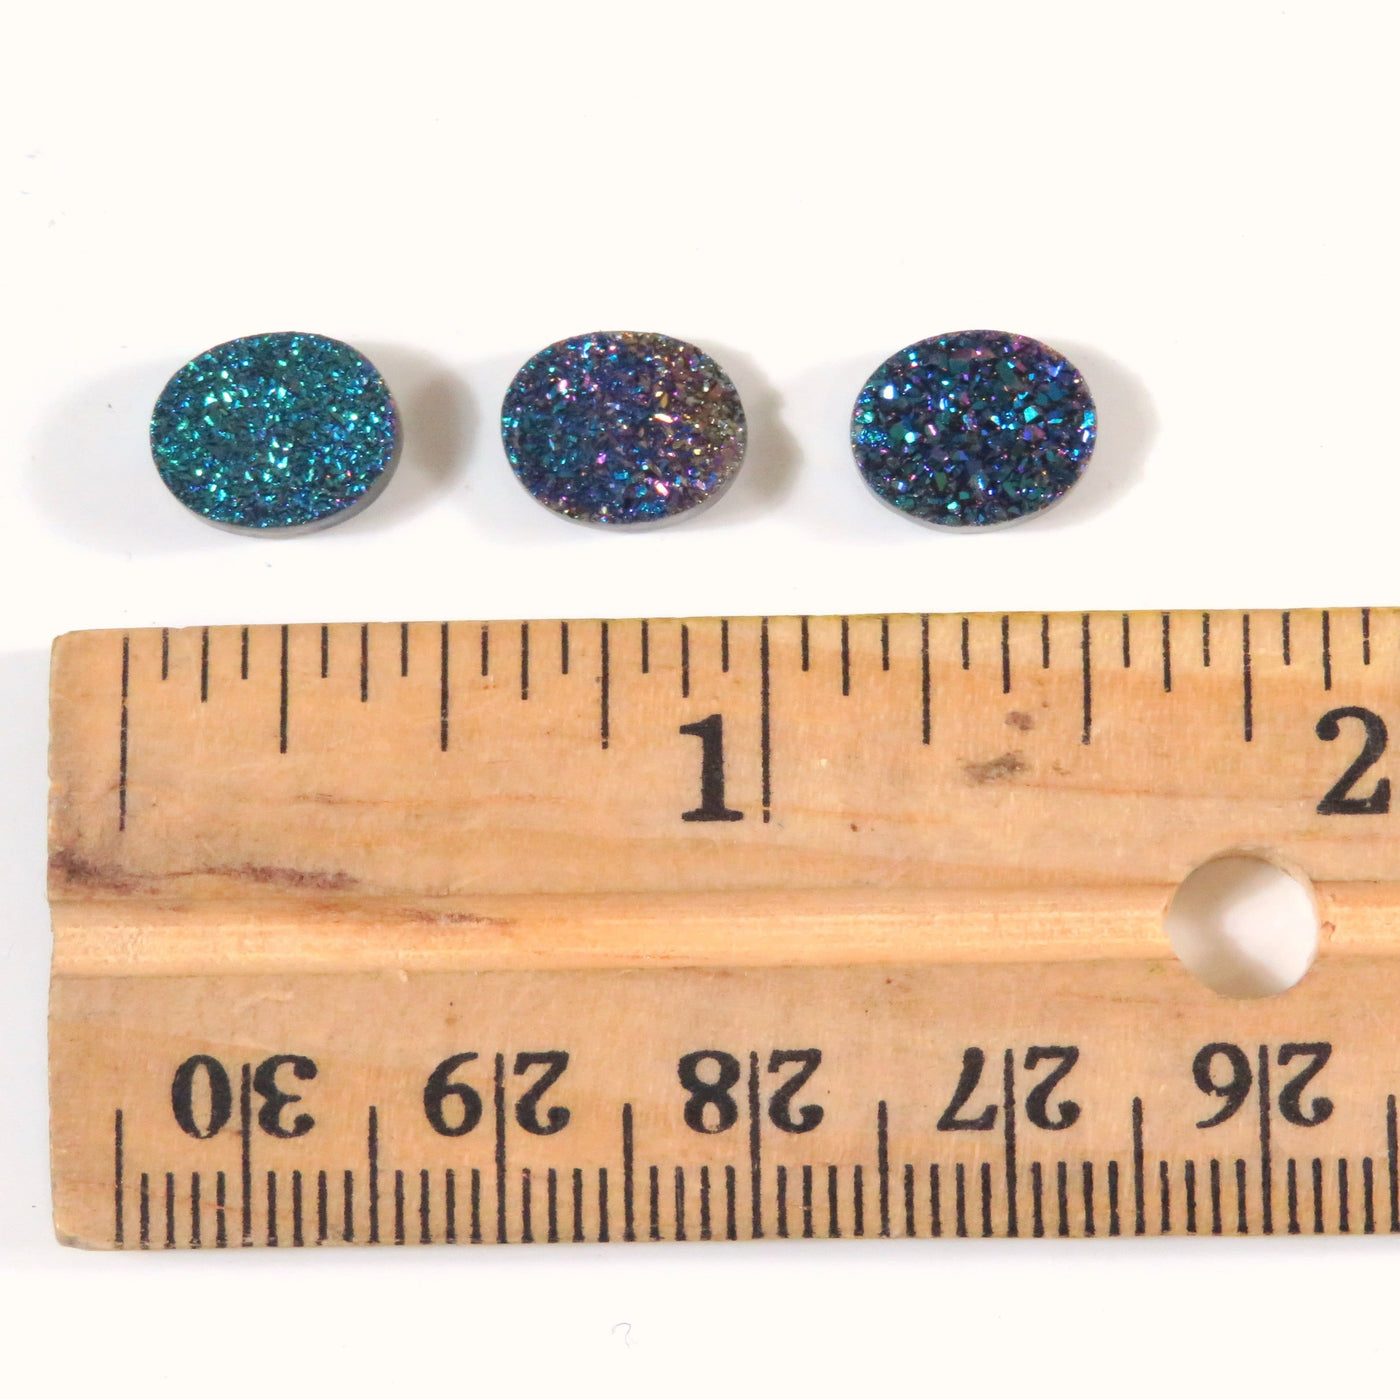 Titanium Coated Round Rainbow Druzy Cabochons next to ruler for size reference